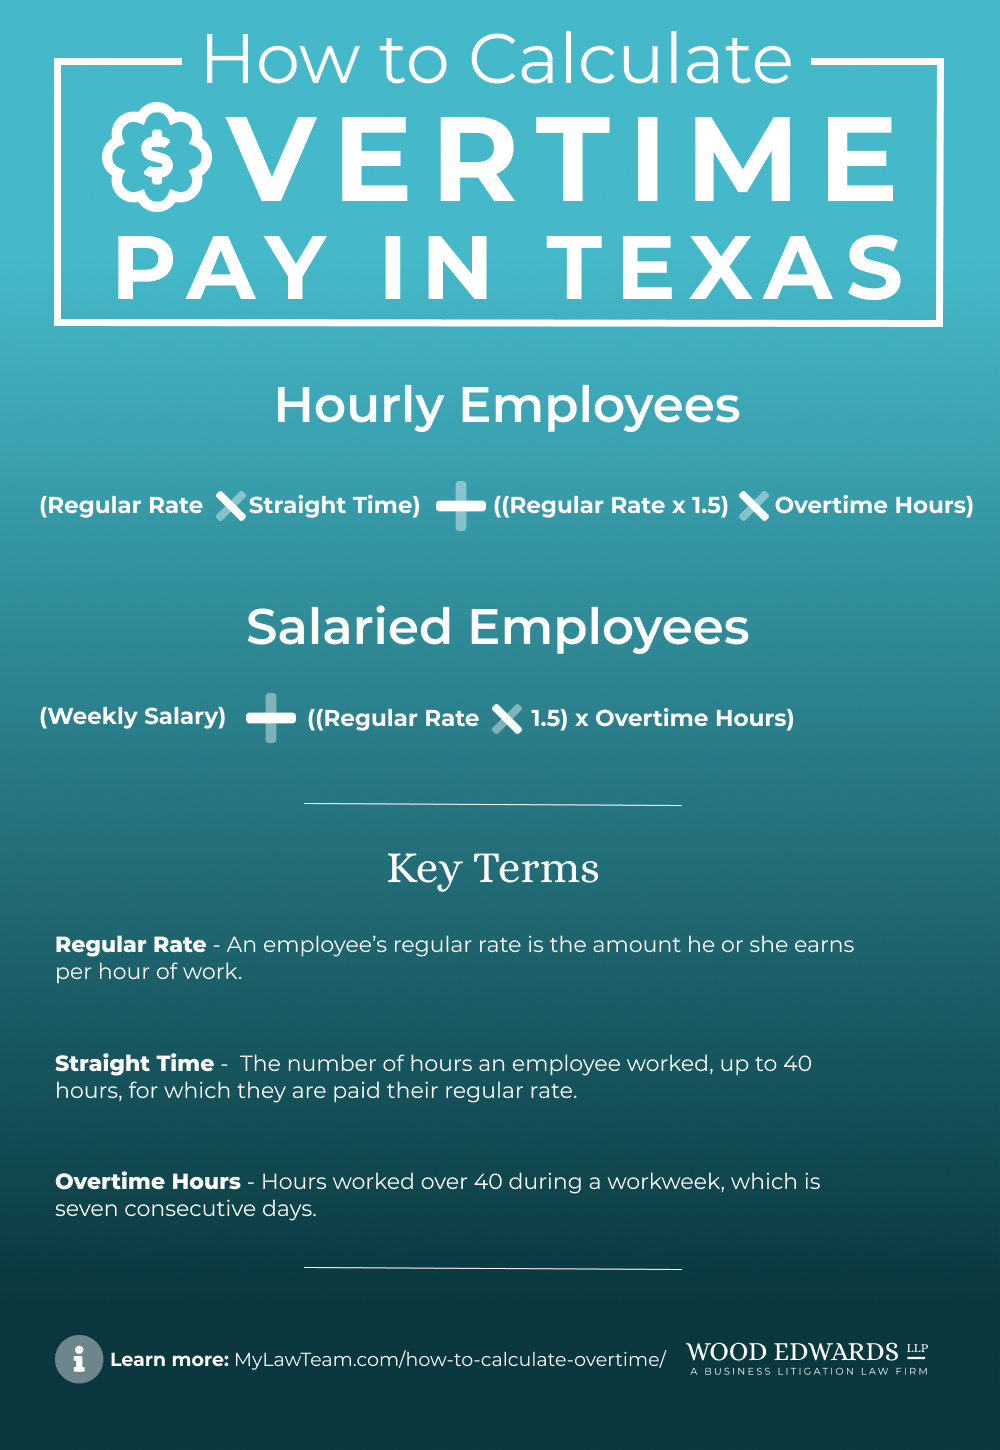 How to Calculate Overtime Pay in Texas